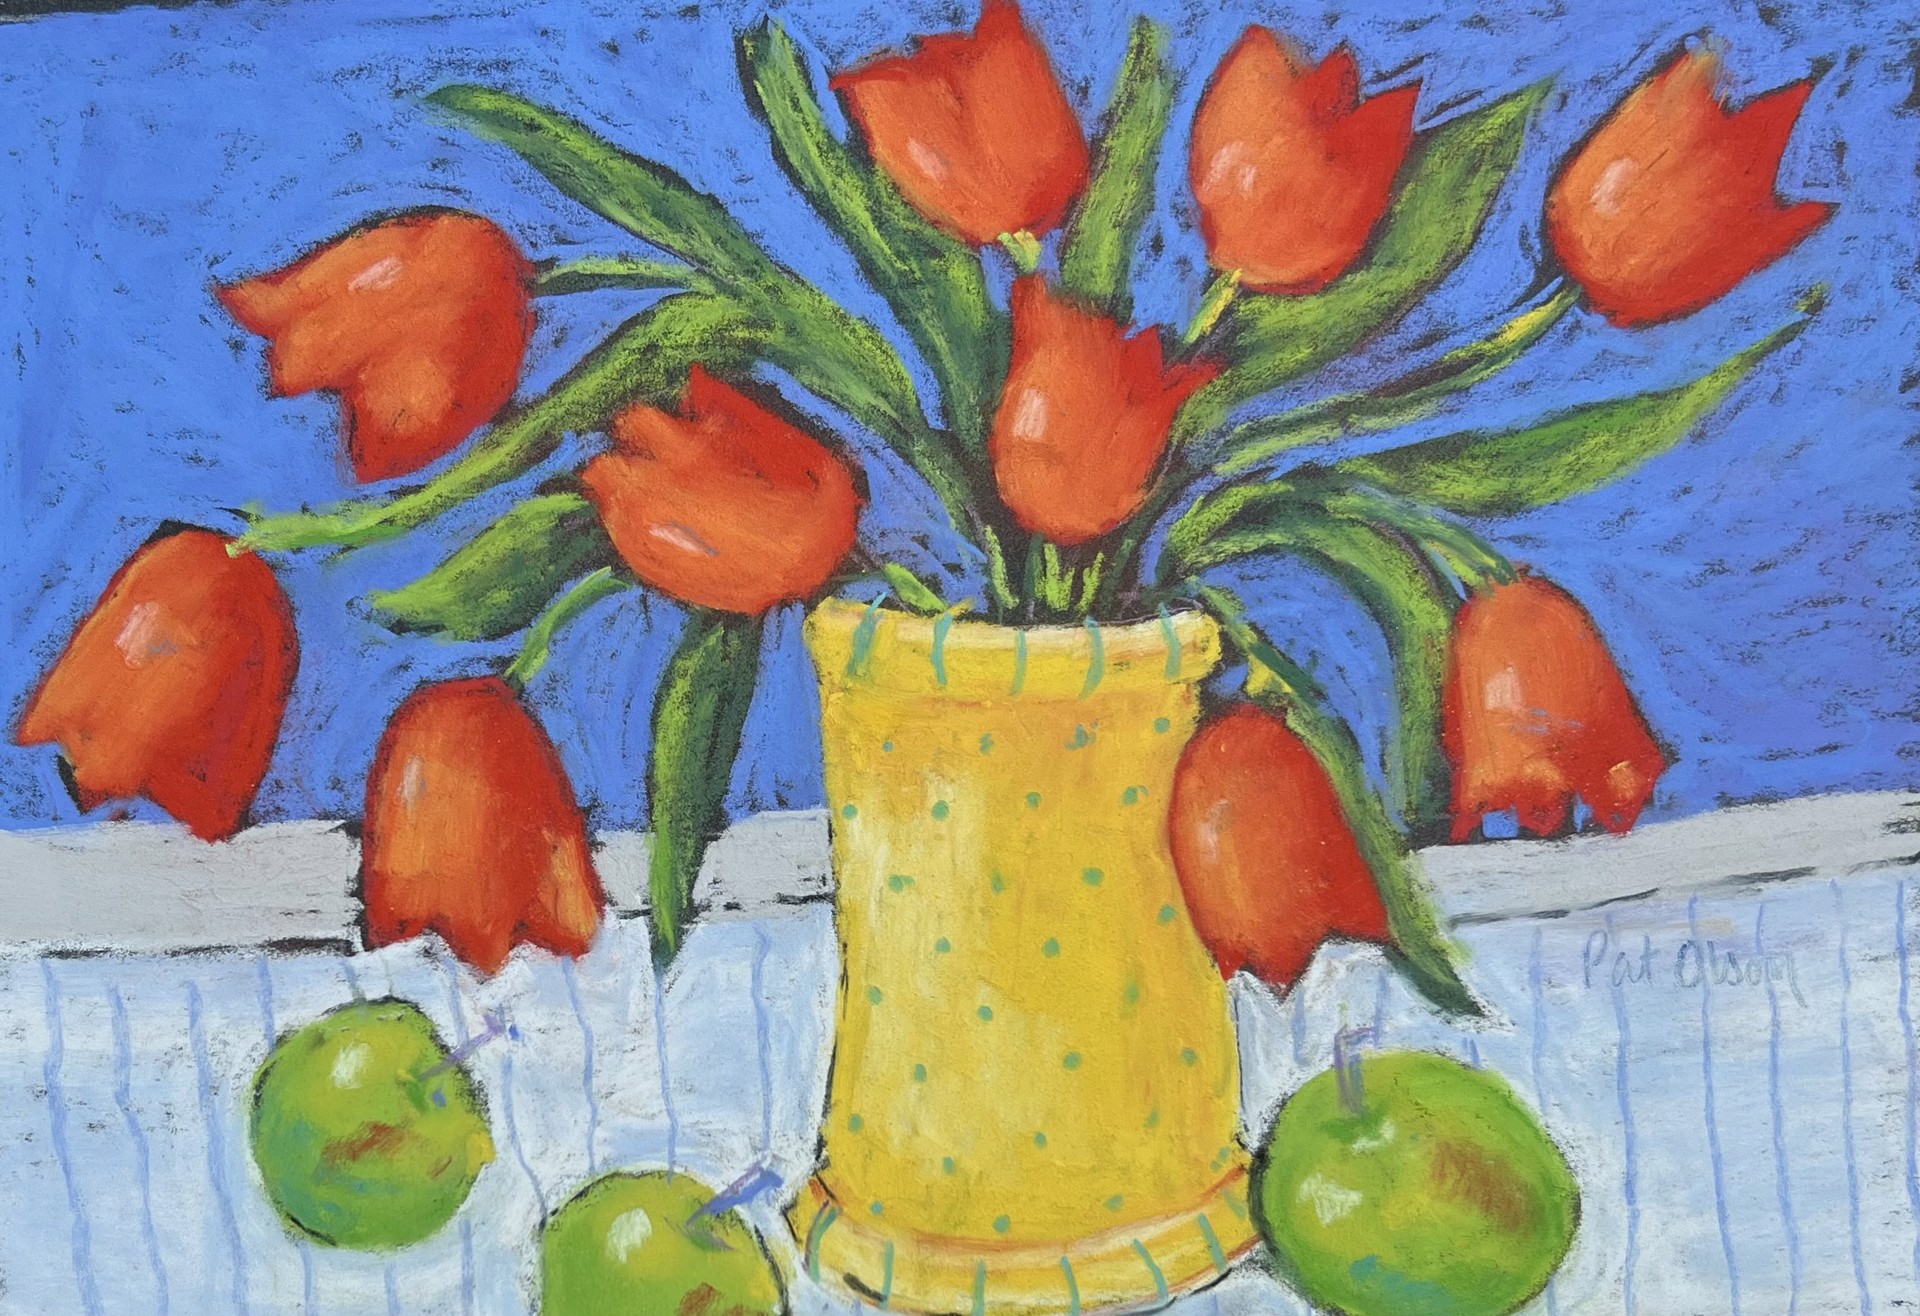 Tulips with Three Green Apples by Pat Olson